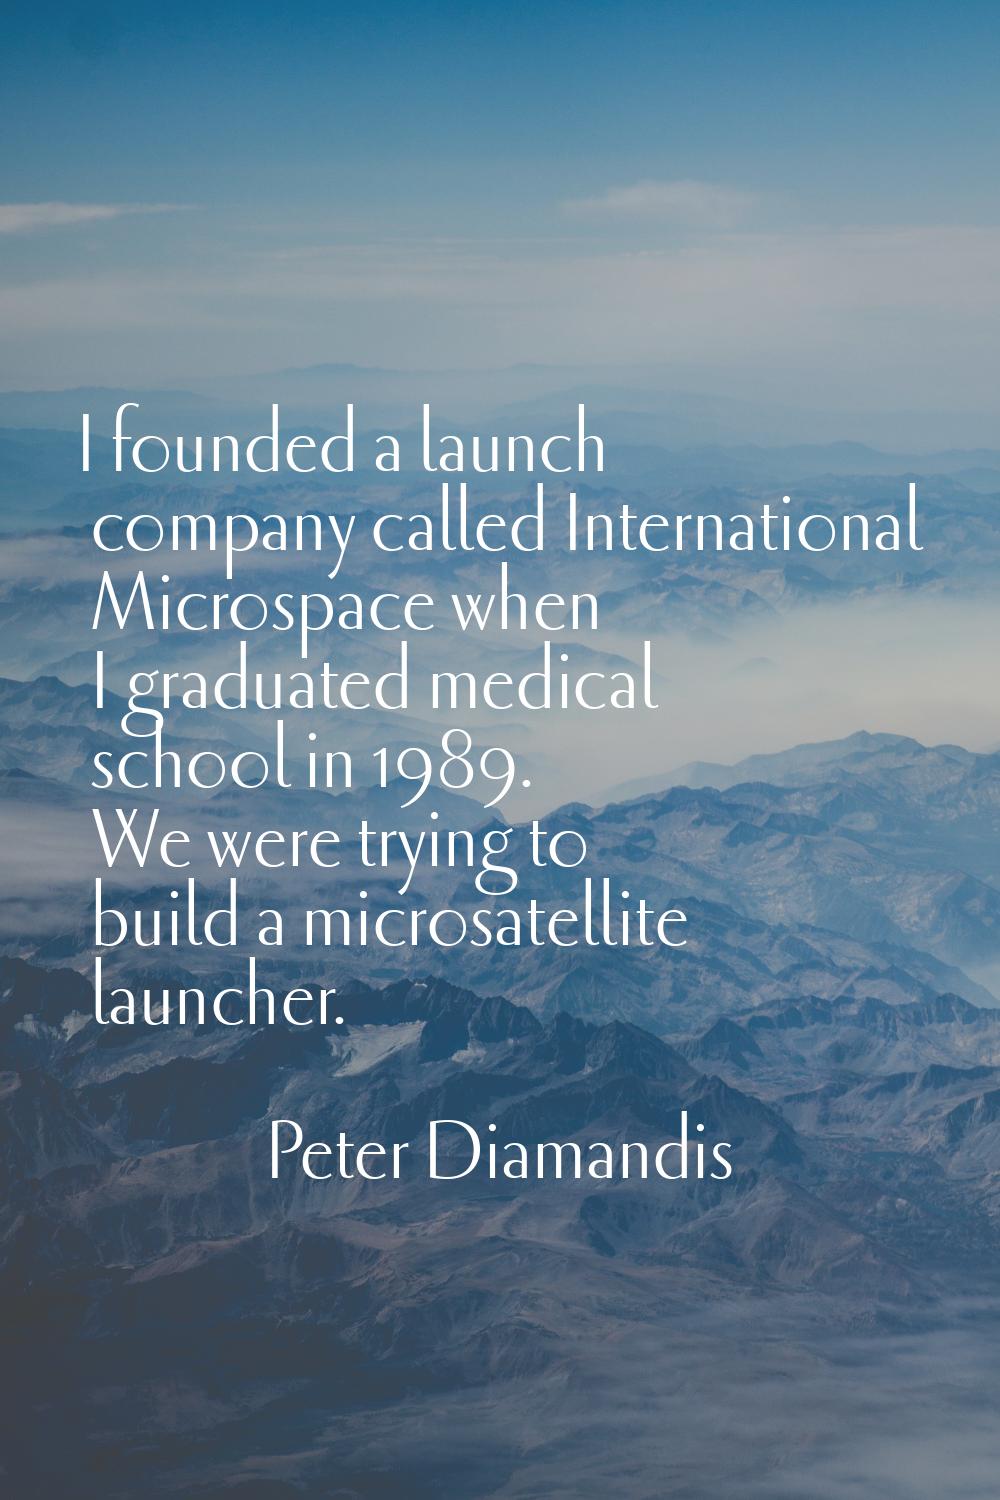 I founded a launch company called International Microspace when I graduated medical school in 1989.